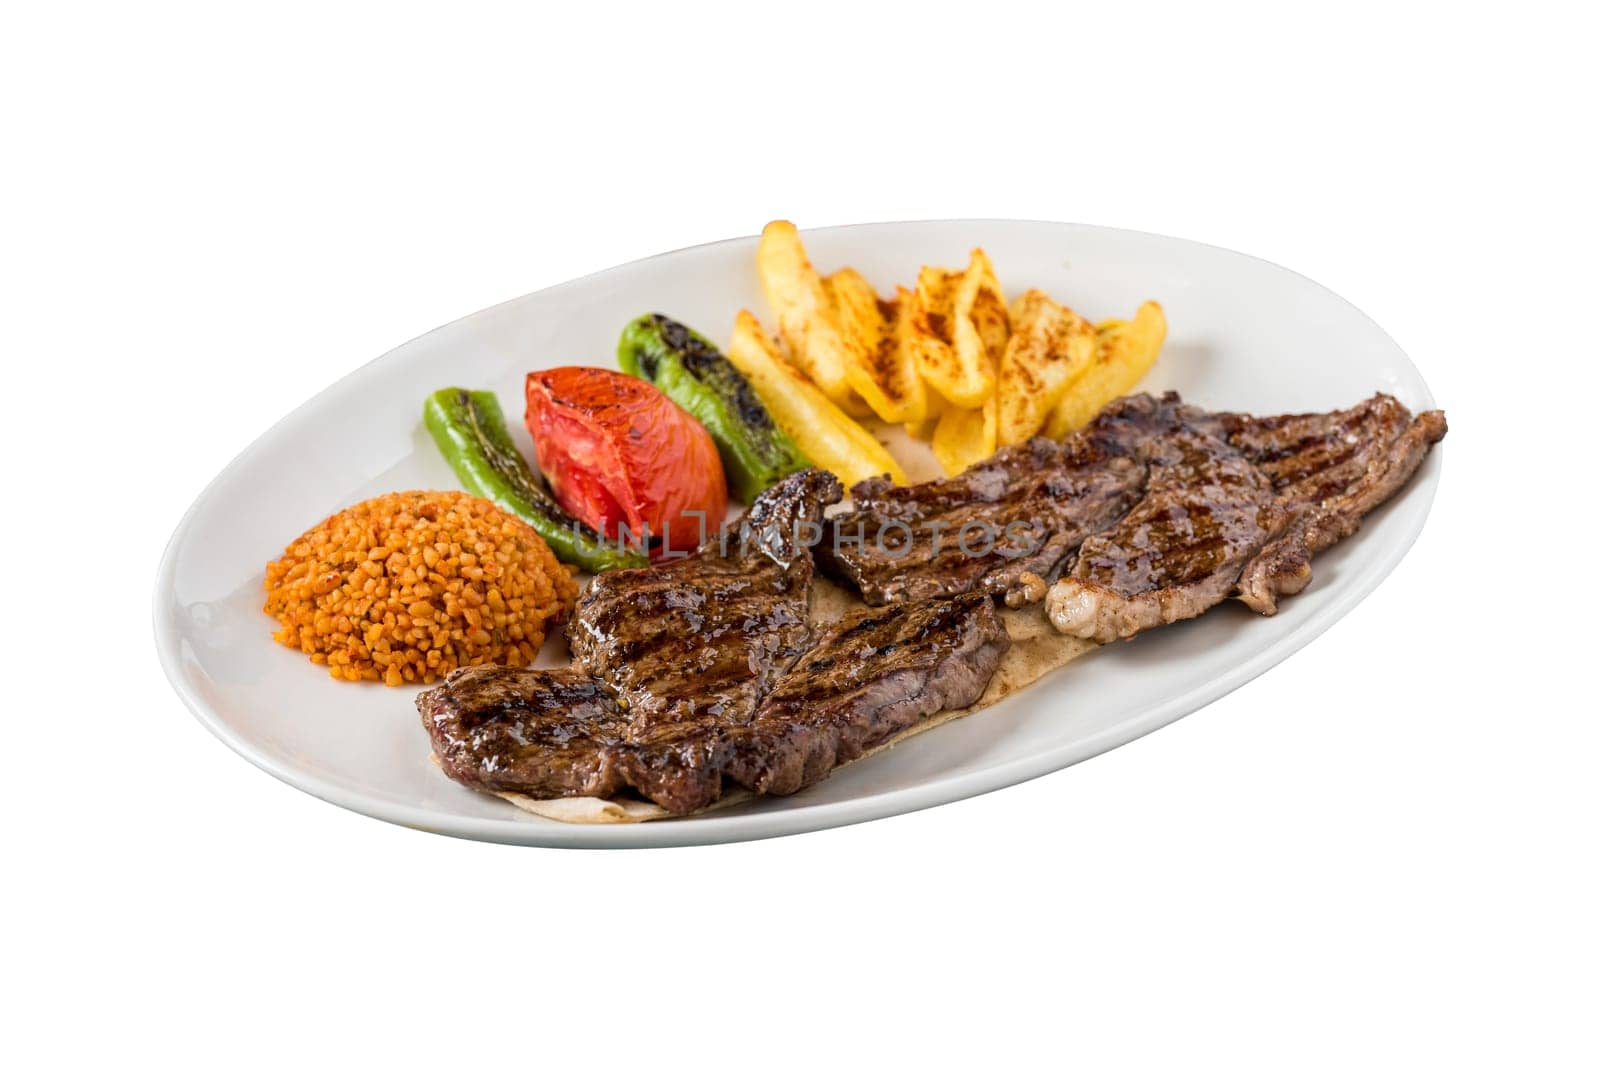 Grilled steak on white background. with bulgur pilaf, french fries, tomatoes garnish by Sonat